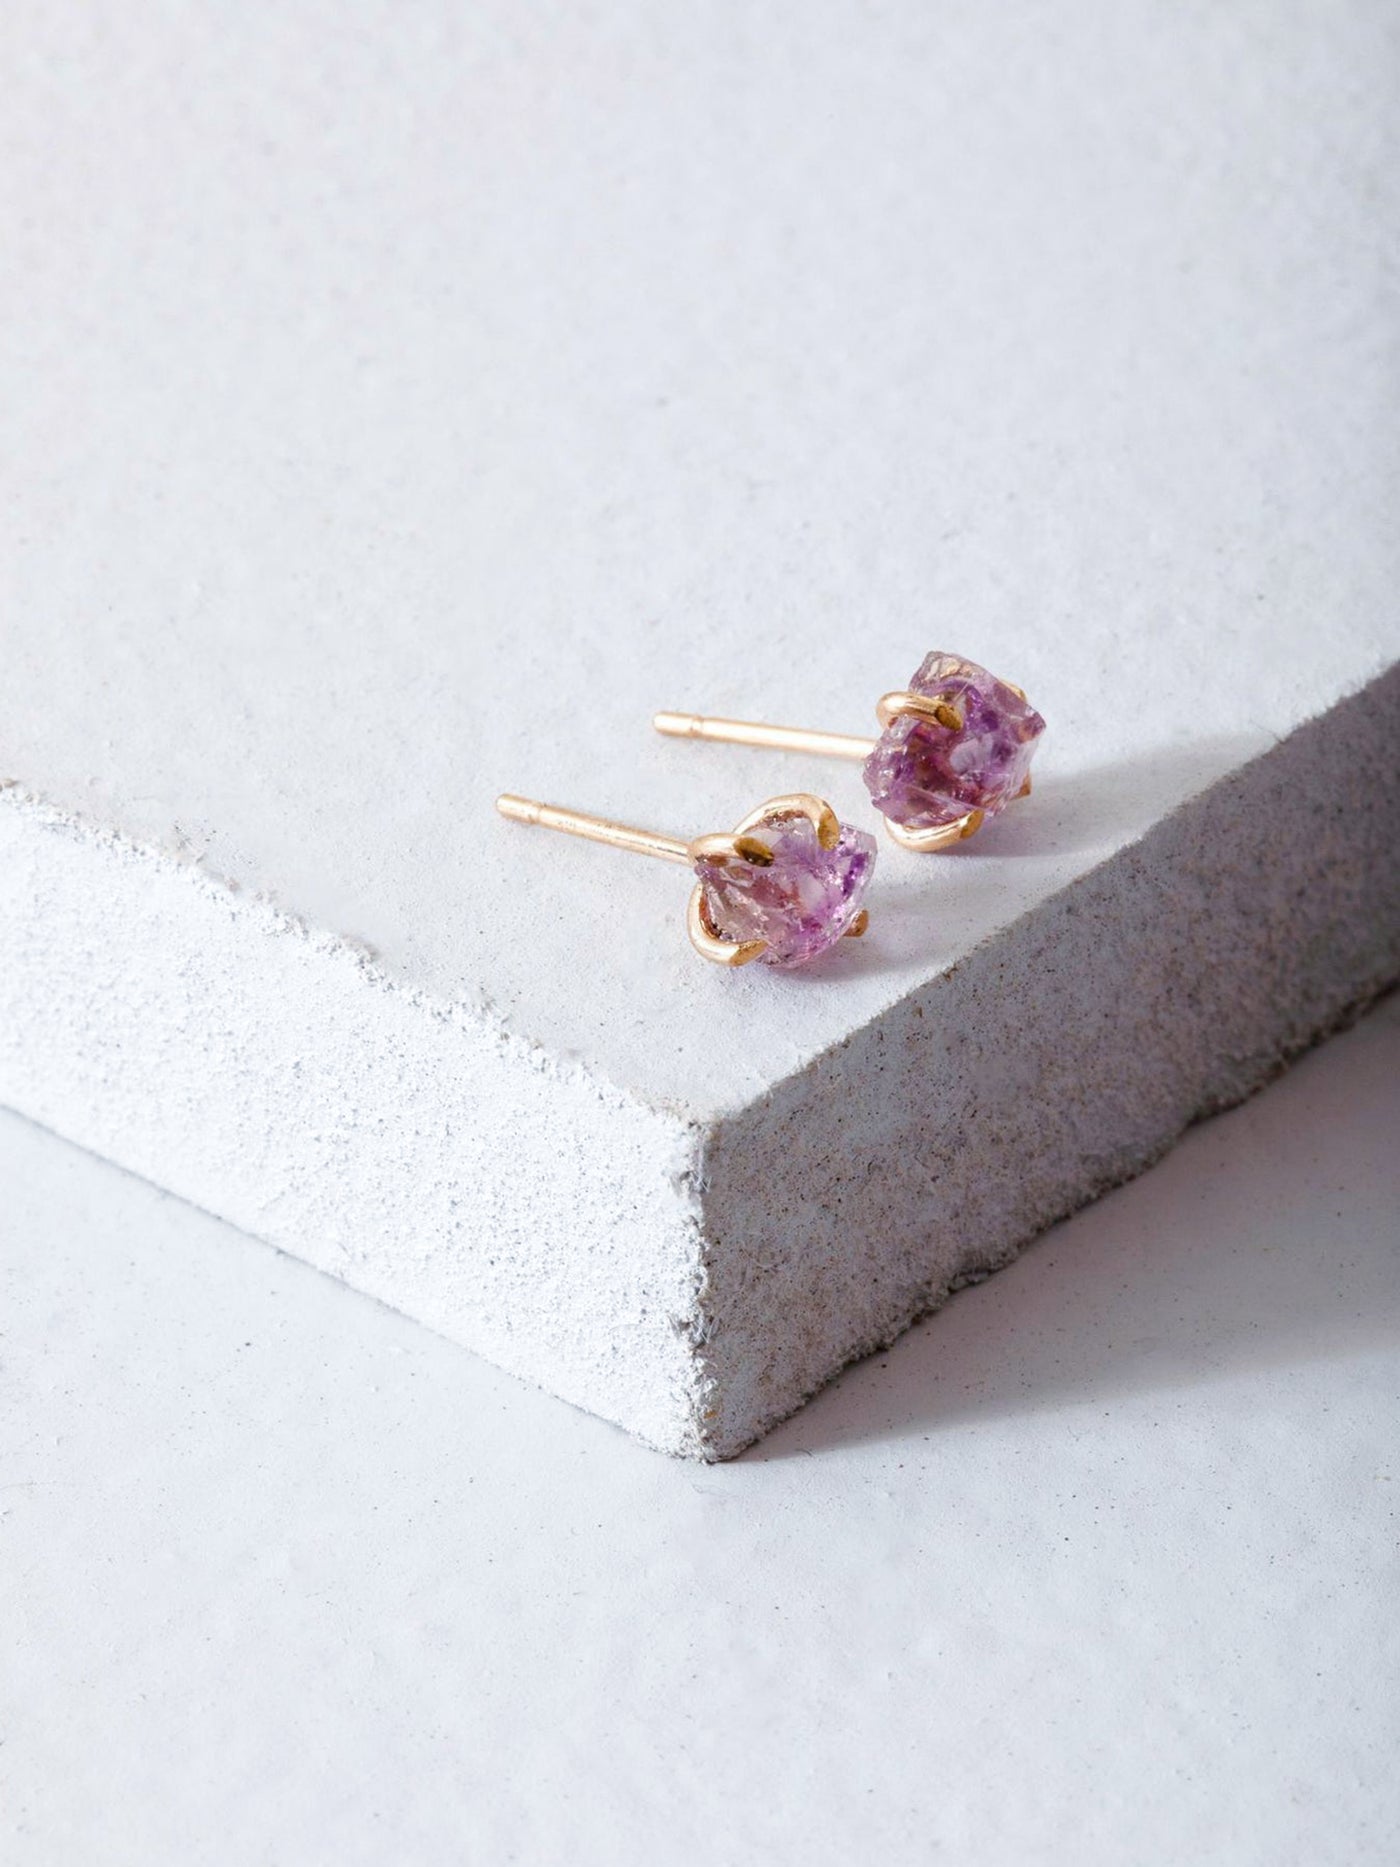 Raw Amethyst Gold Stud Earrings. These versatile raw amethyst stud make for an ideal statement piece and are set in high quality 14k yellow gold prongs.